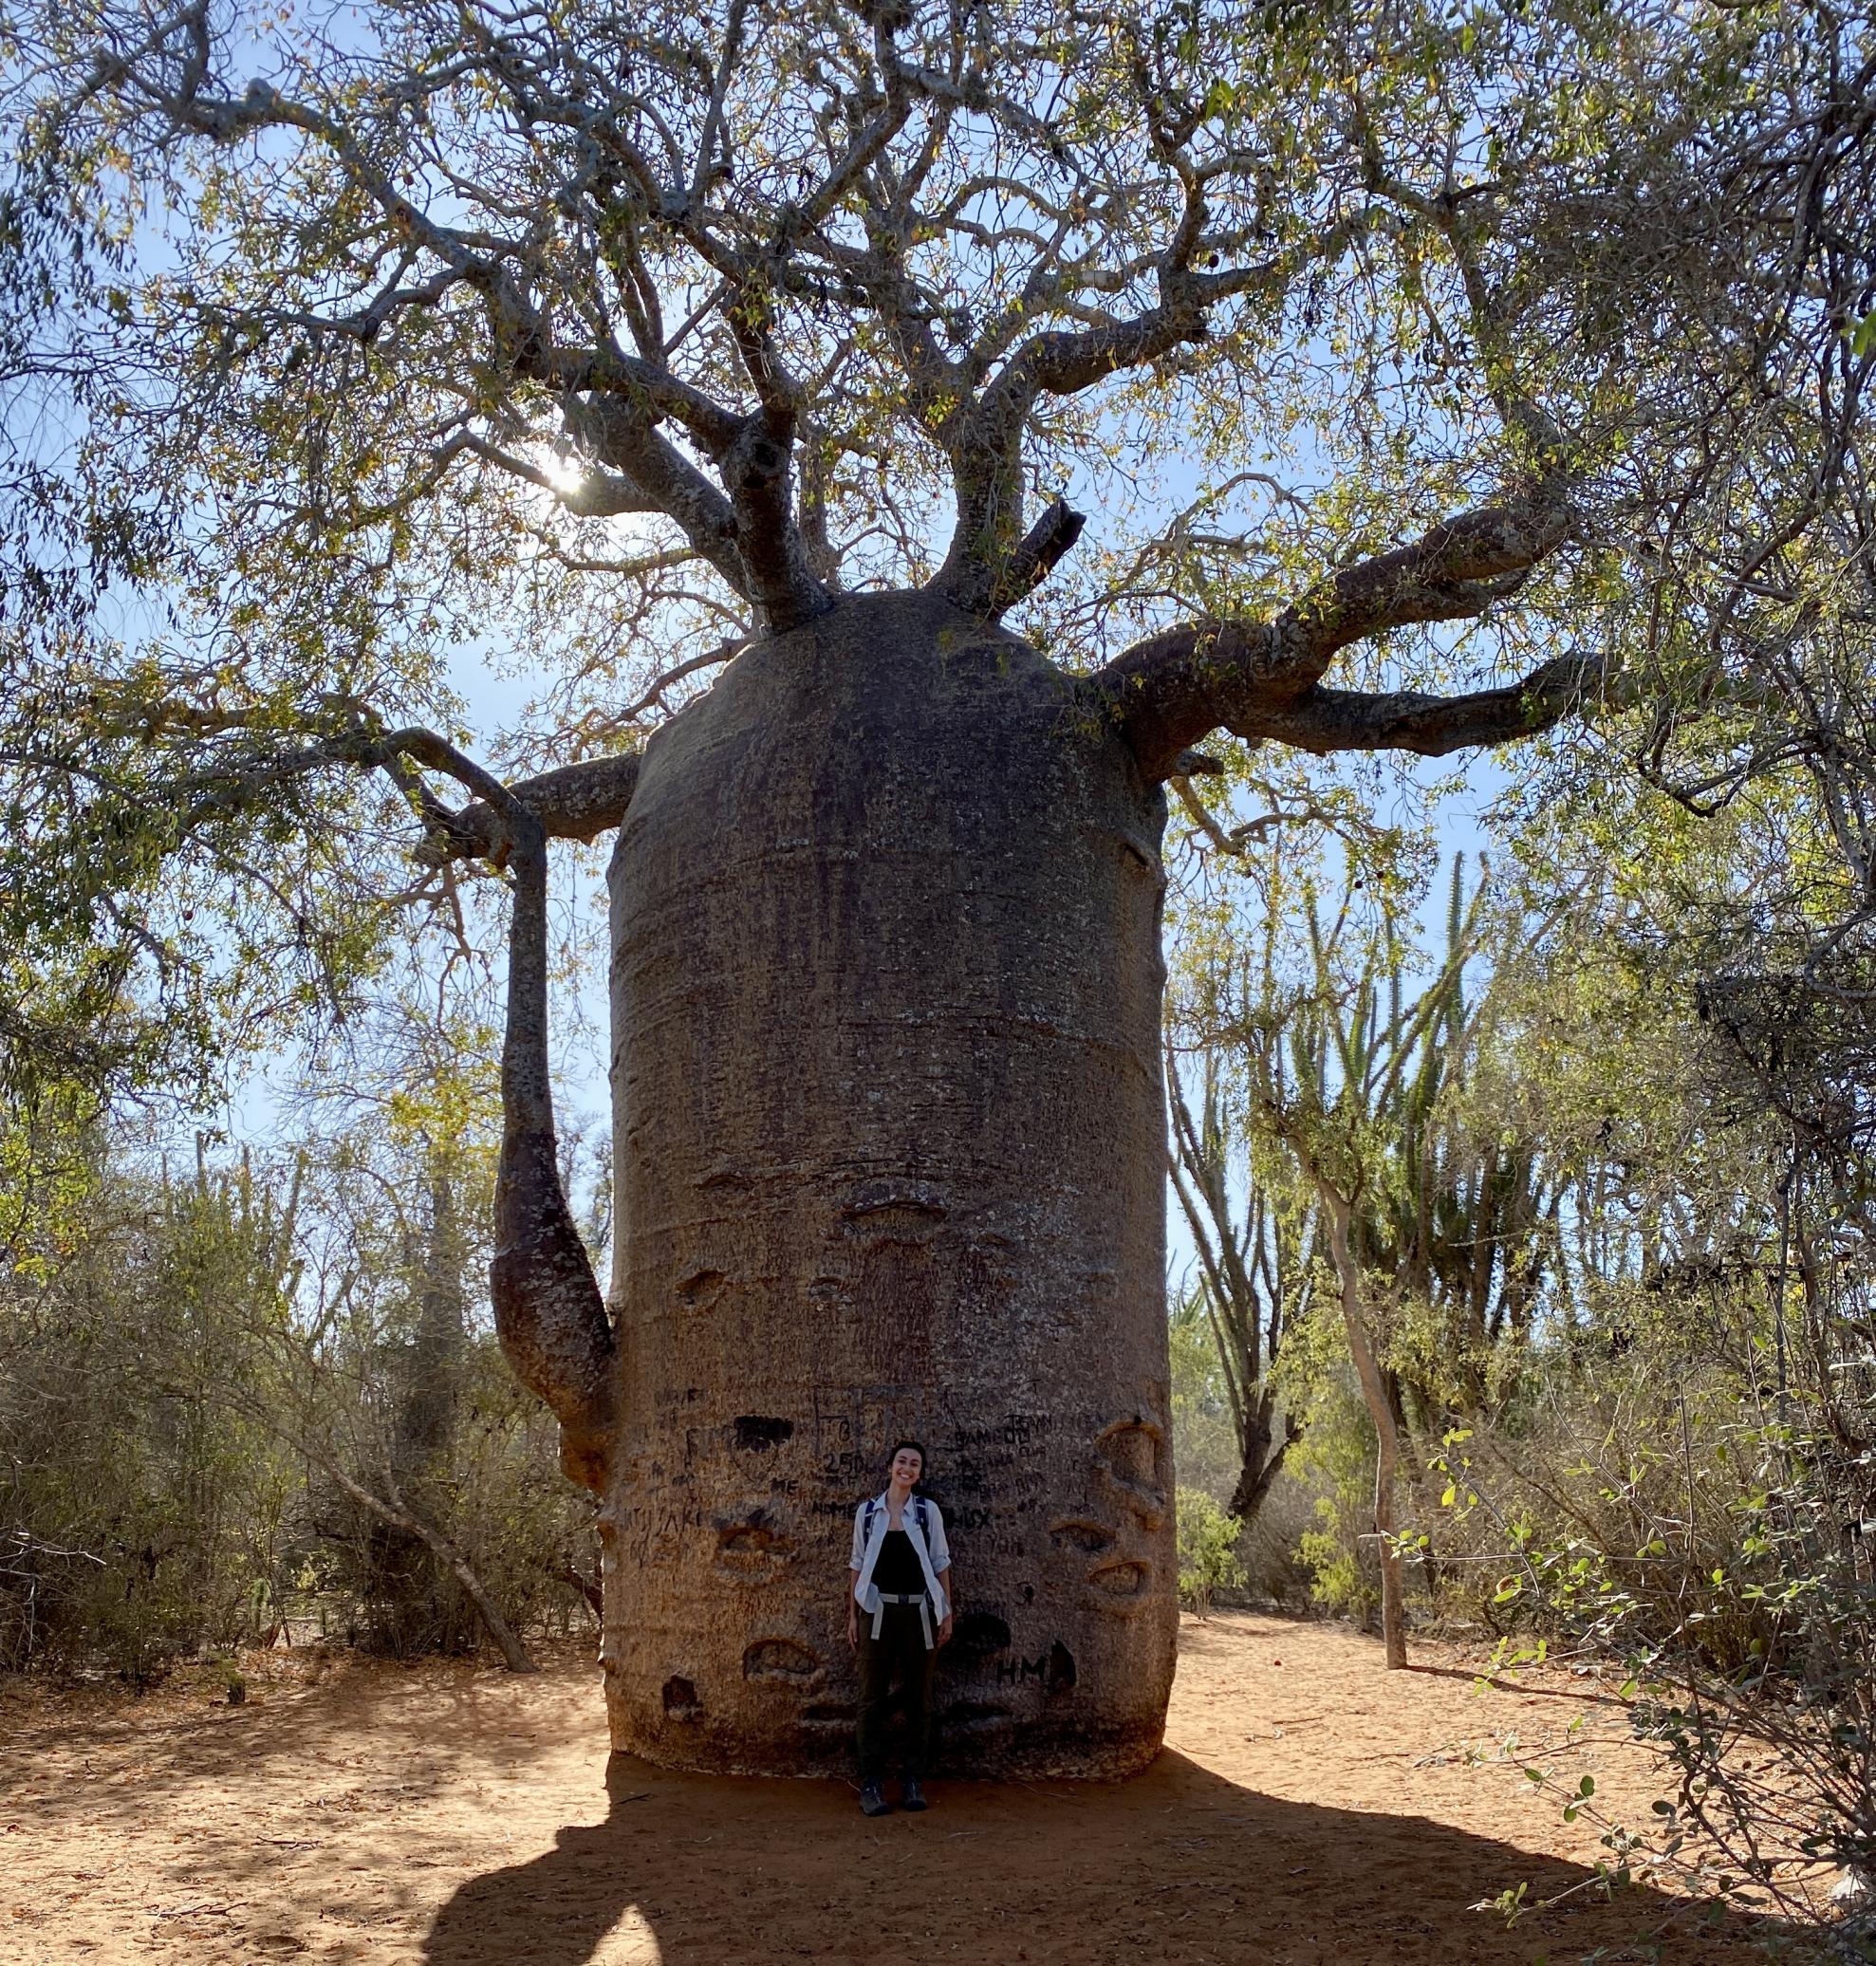 This is a 1,200 year old baobab tree in the spiny forest of Madagascar, where I studied anthropology and conducted research this summer." -Audrey Safir, Undergraduate 1st Place